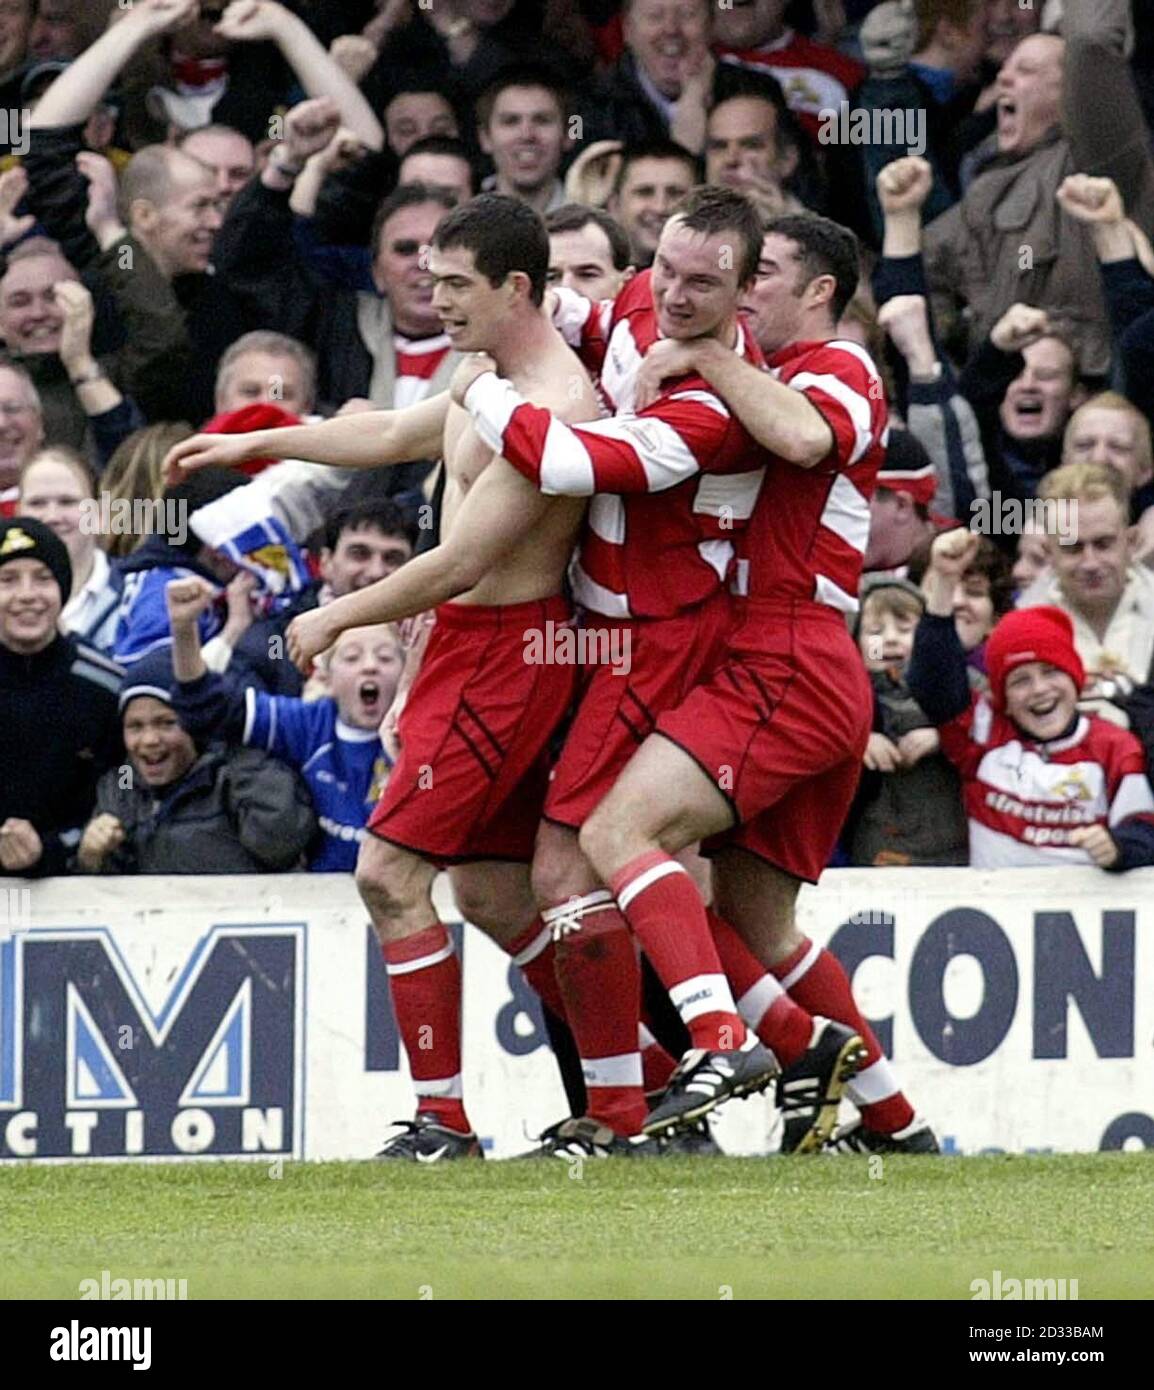 Doncaster's Gregg Blundell (leftt) celebrates with team-mates after scoring the winning goal against Scunthorpe during the Division three Boxing day match held at Bellevue Stadium, Doncaster. THIS PICTURE CAN ONLY BE USED WITHIN THE CONTEXT OF AN EDITORIAL FEATURE. NO UNOFFICIAL CLUB WEBSITE USE. Stock Photo